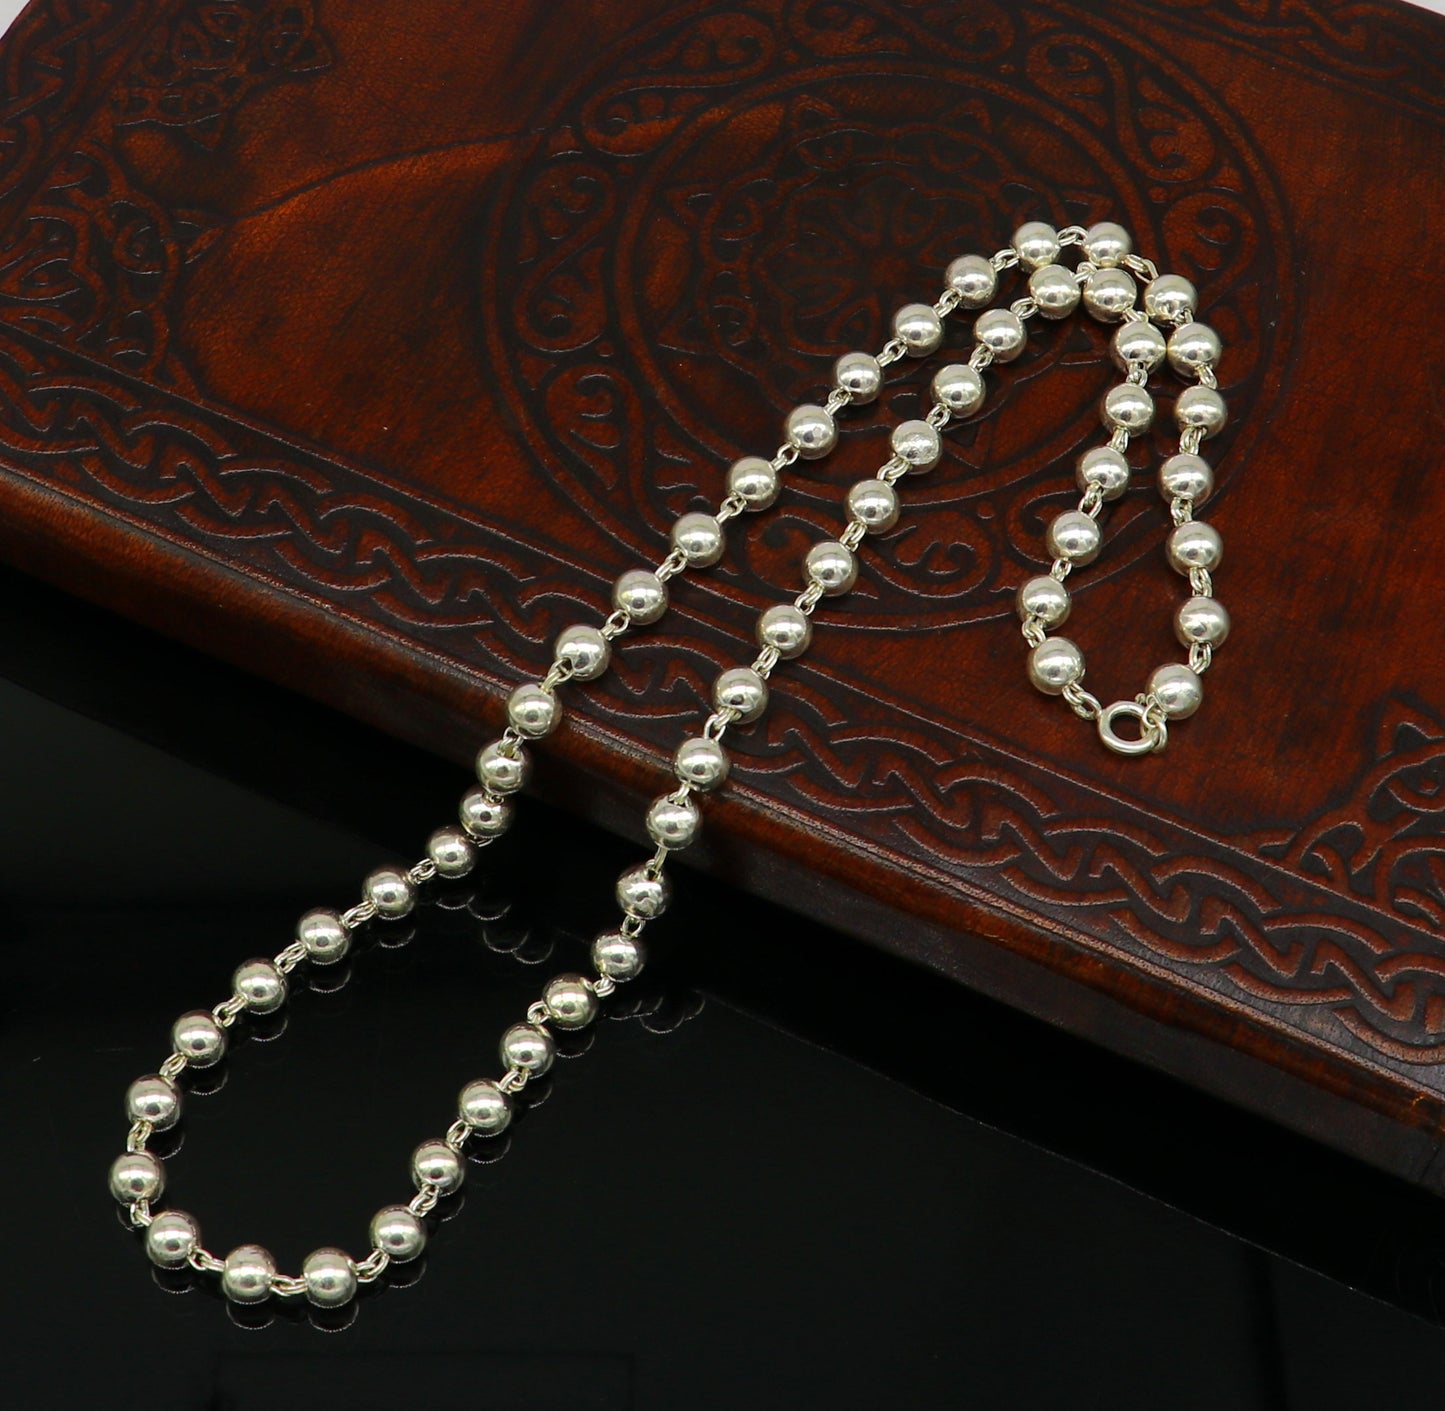 925 sterling silver handmade beaded chain necklace, exclusivr 19.5 inches long unisex best gifting necklace daily use jewelry nch12 - TRIBAL ORNAMENTS